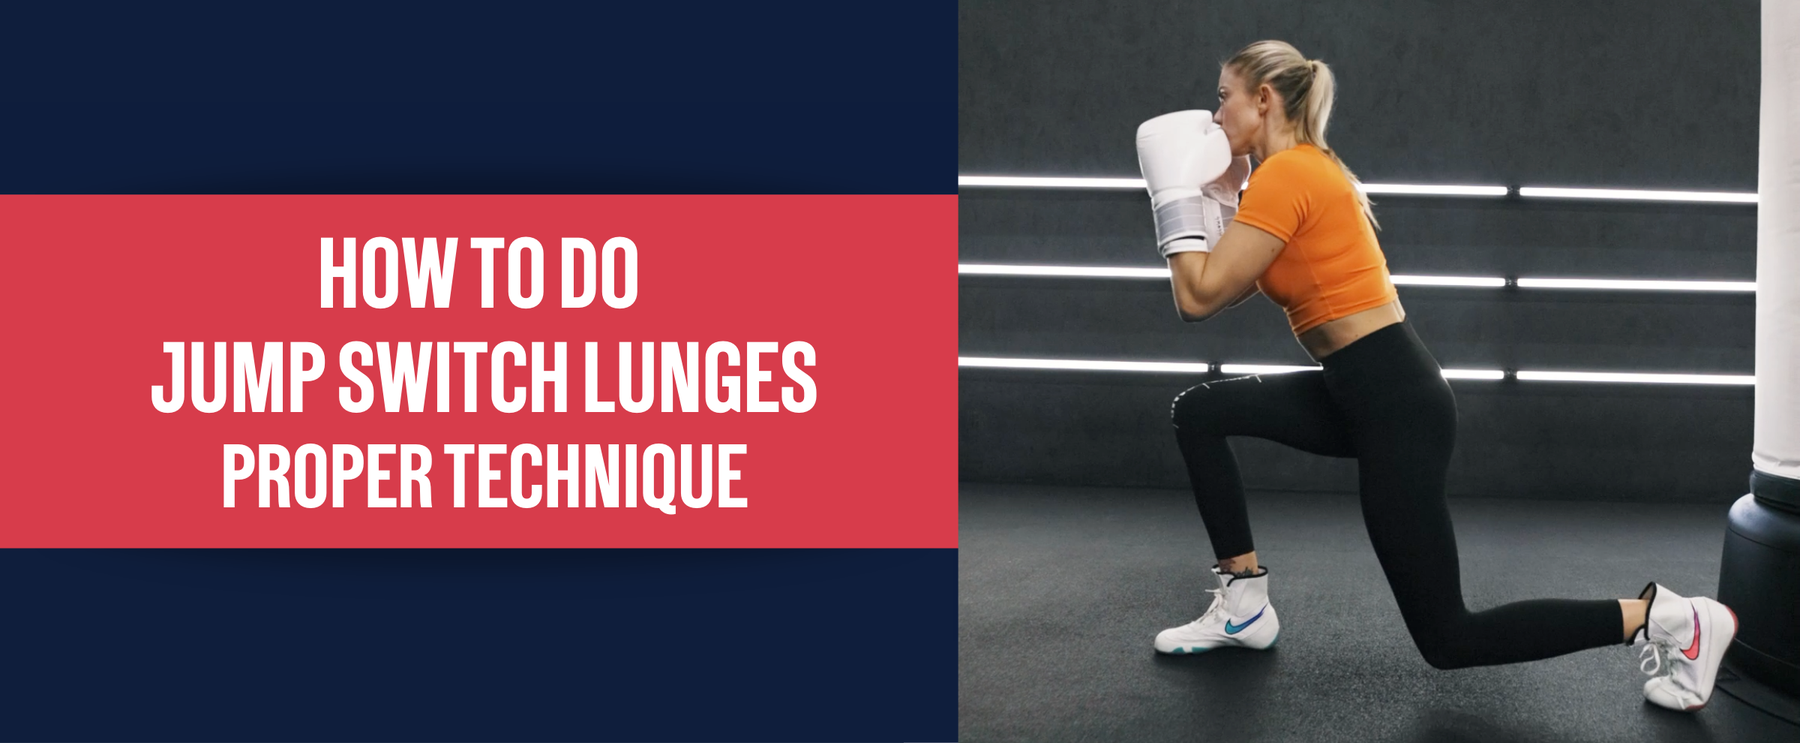 How To Do Jump Switch Lunges | Proper Technique